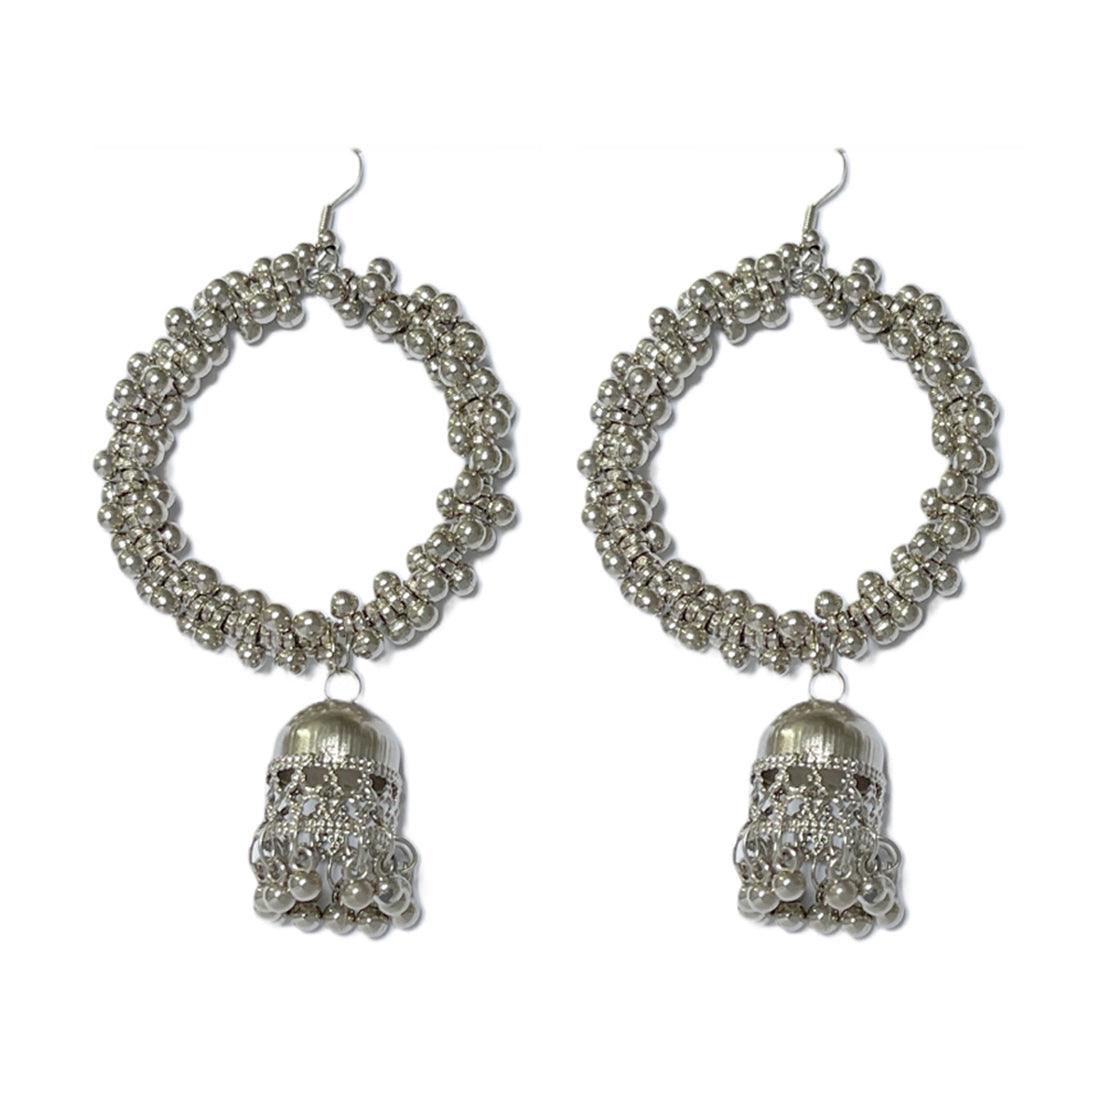 Oversized Handcrafted Ethnic Silver-Toned Ghungroo Circular Jhumki Drop Earrings